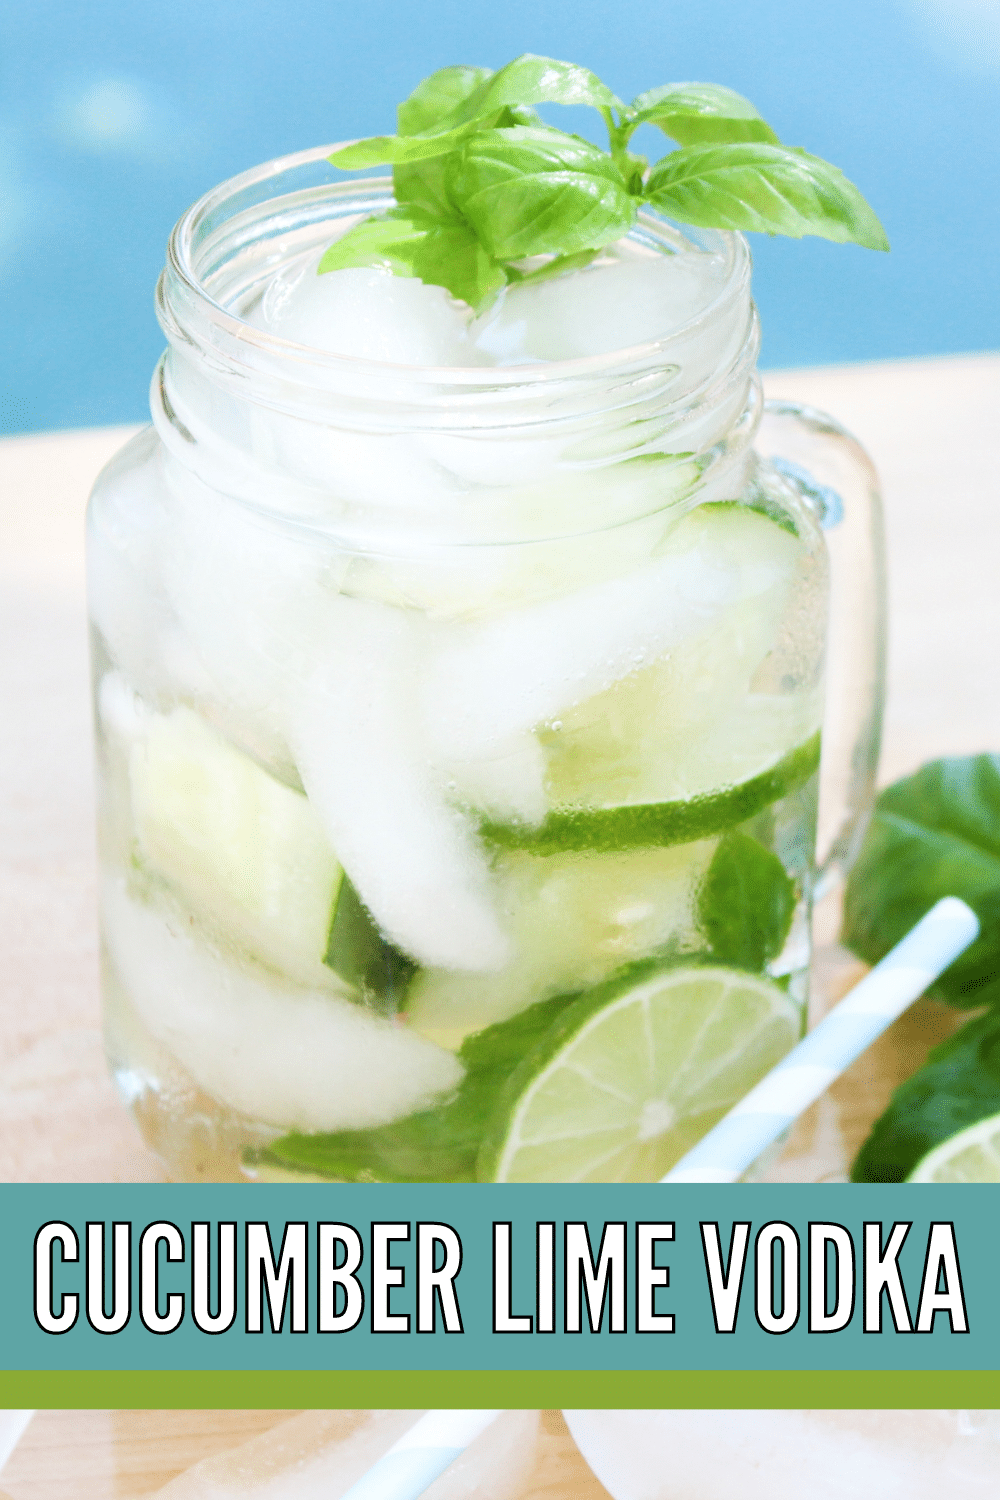 Cool off with a refreshing Cucumber Lime Vodka Cocktail featuring tangy and fizzy flavors wrapped in ice-cold soda water. #cucumberlimevodka #cocktail #cucumbervodka #vodkacocktails #cocktailrecipes via @wondermomwannab